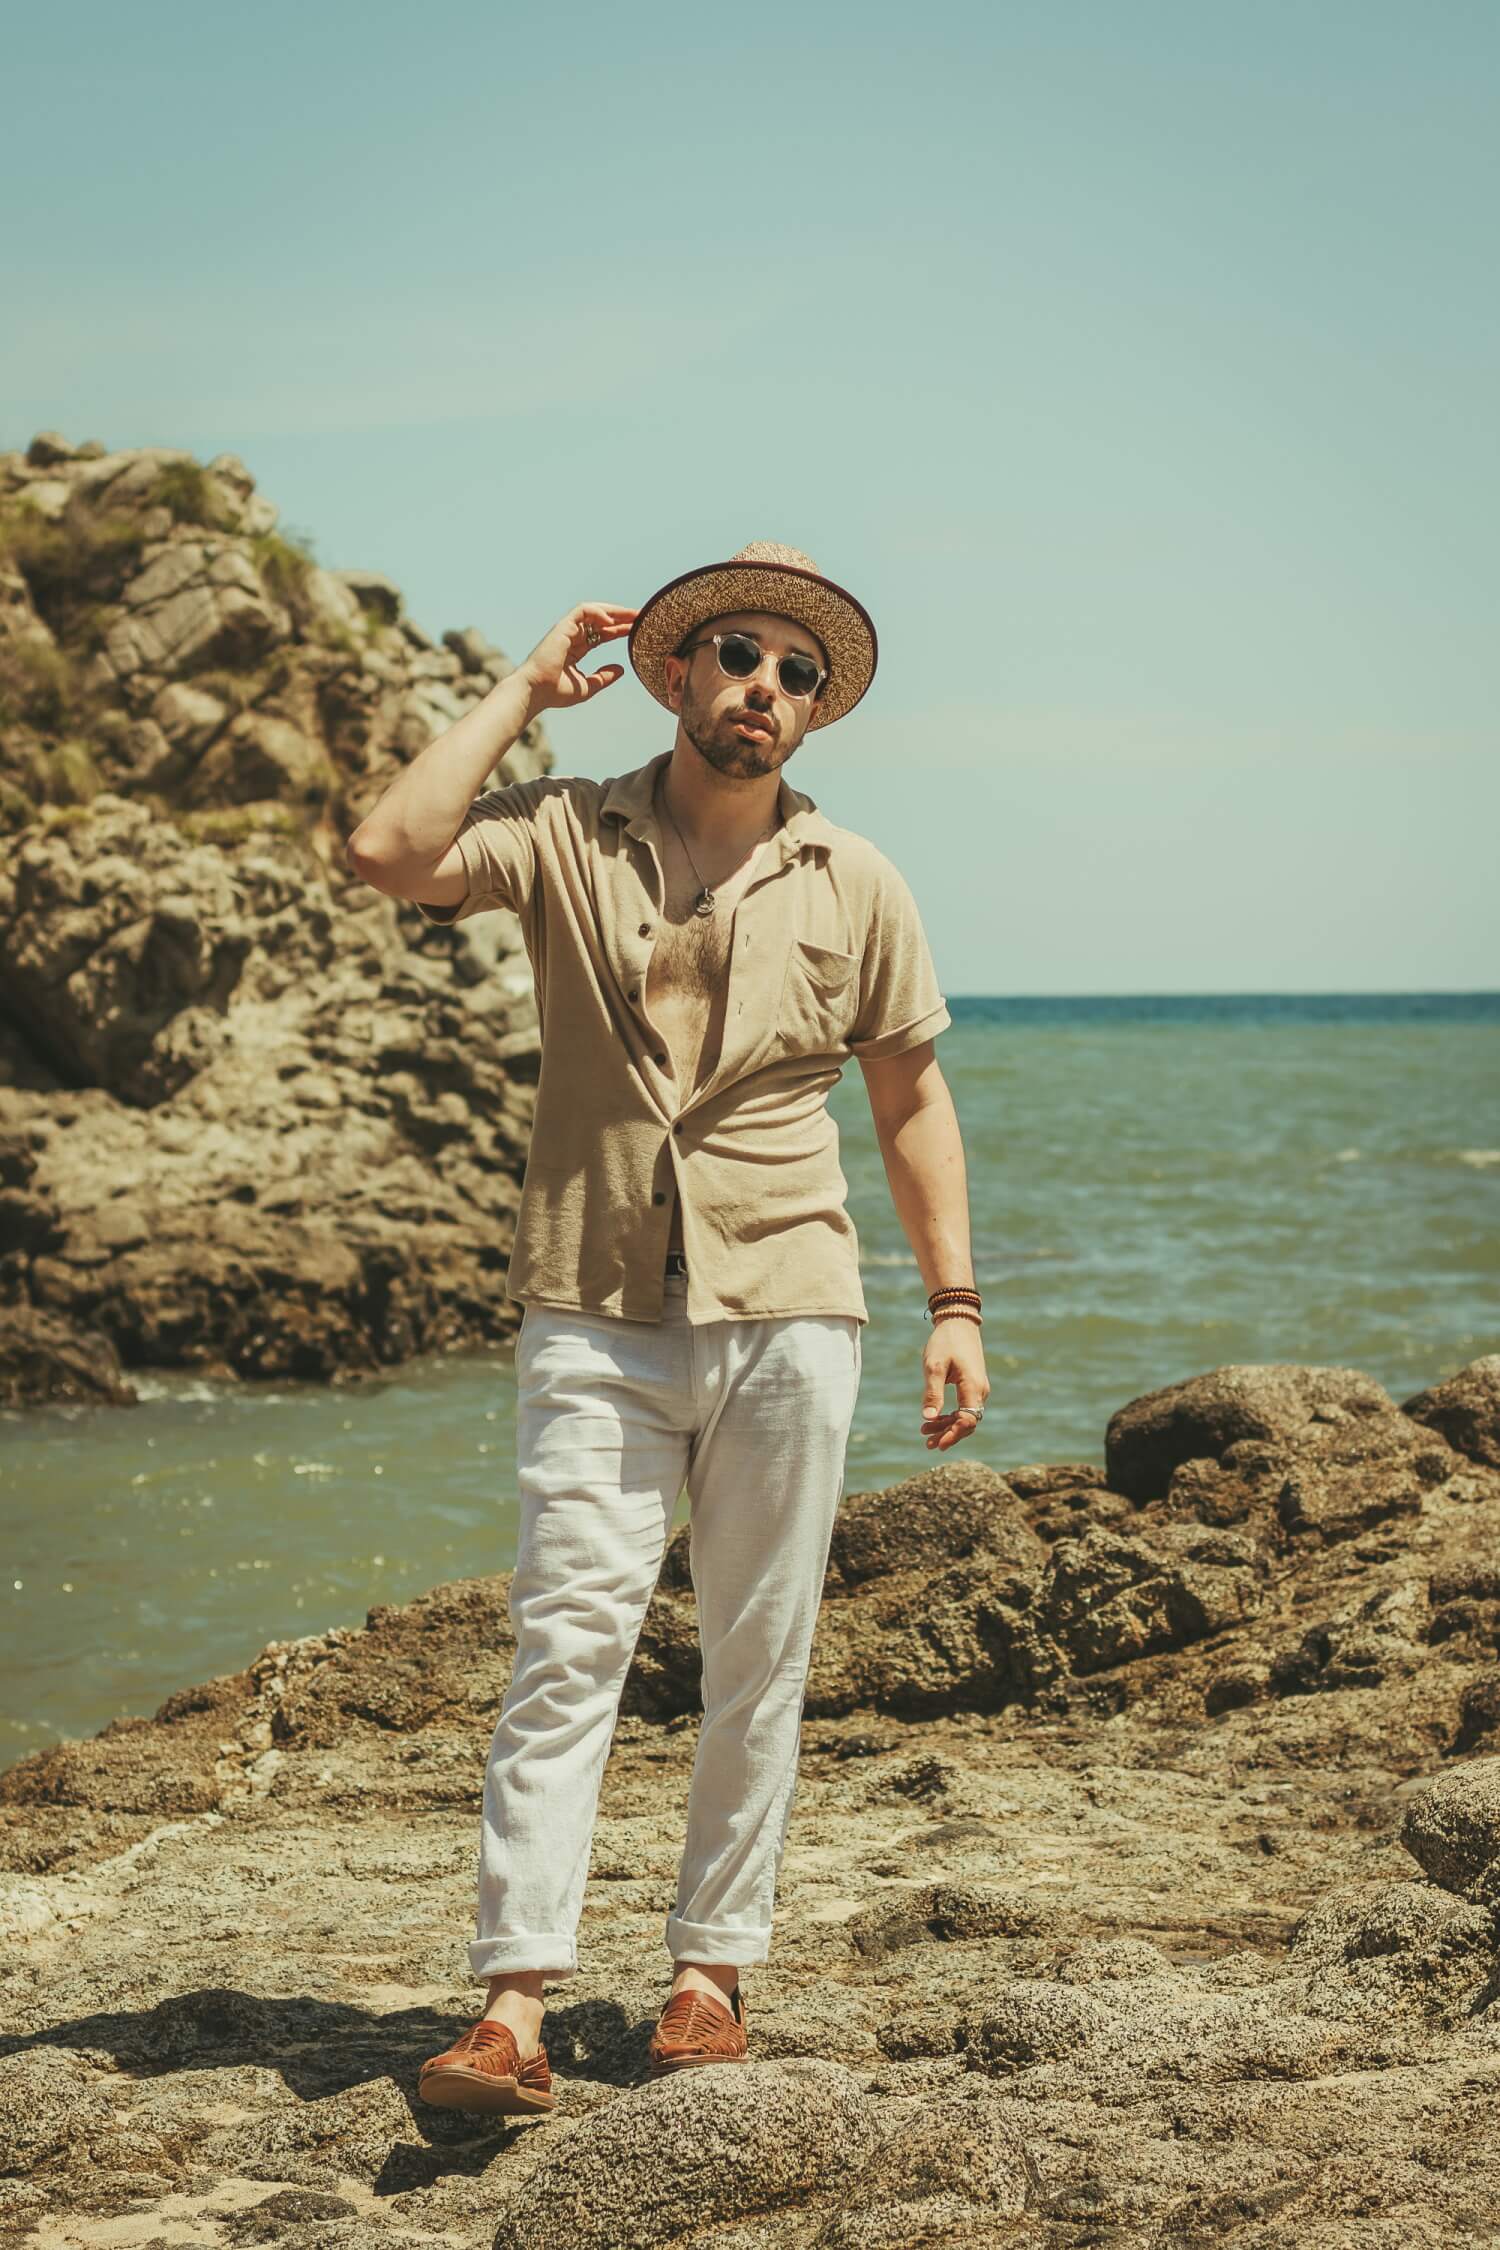 10 Simple Beach Outfit Styling Tips Men Should Follow